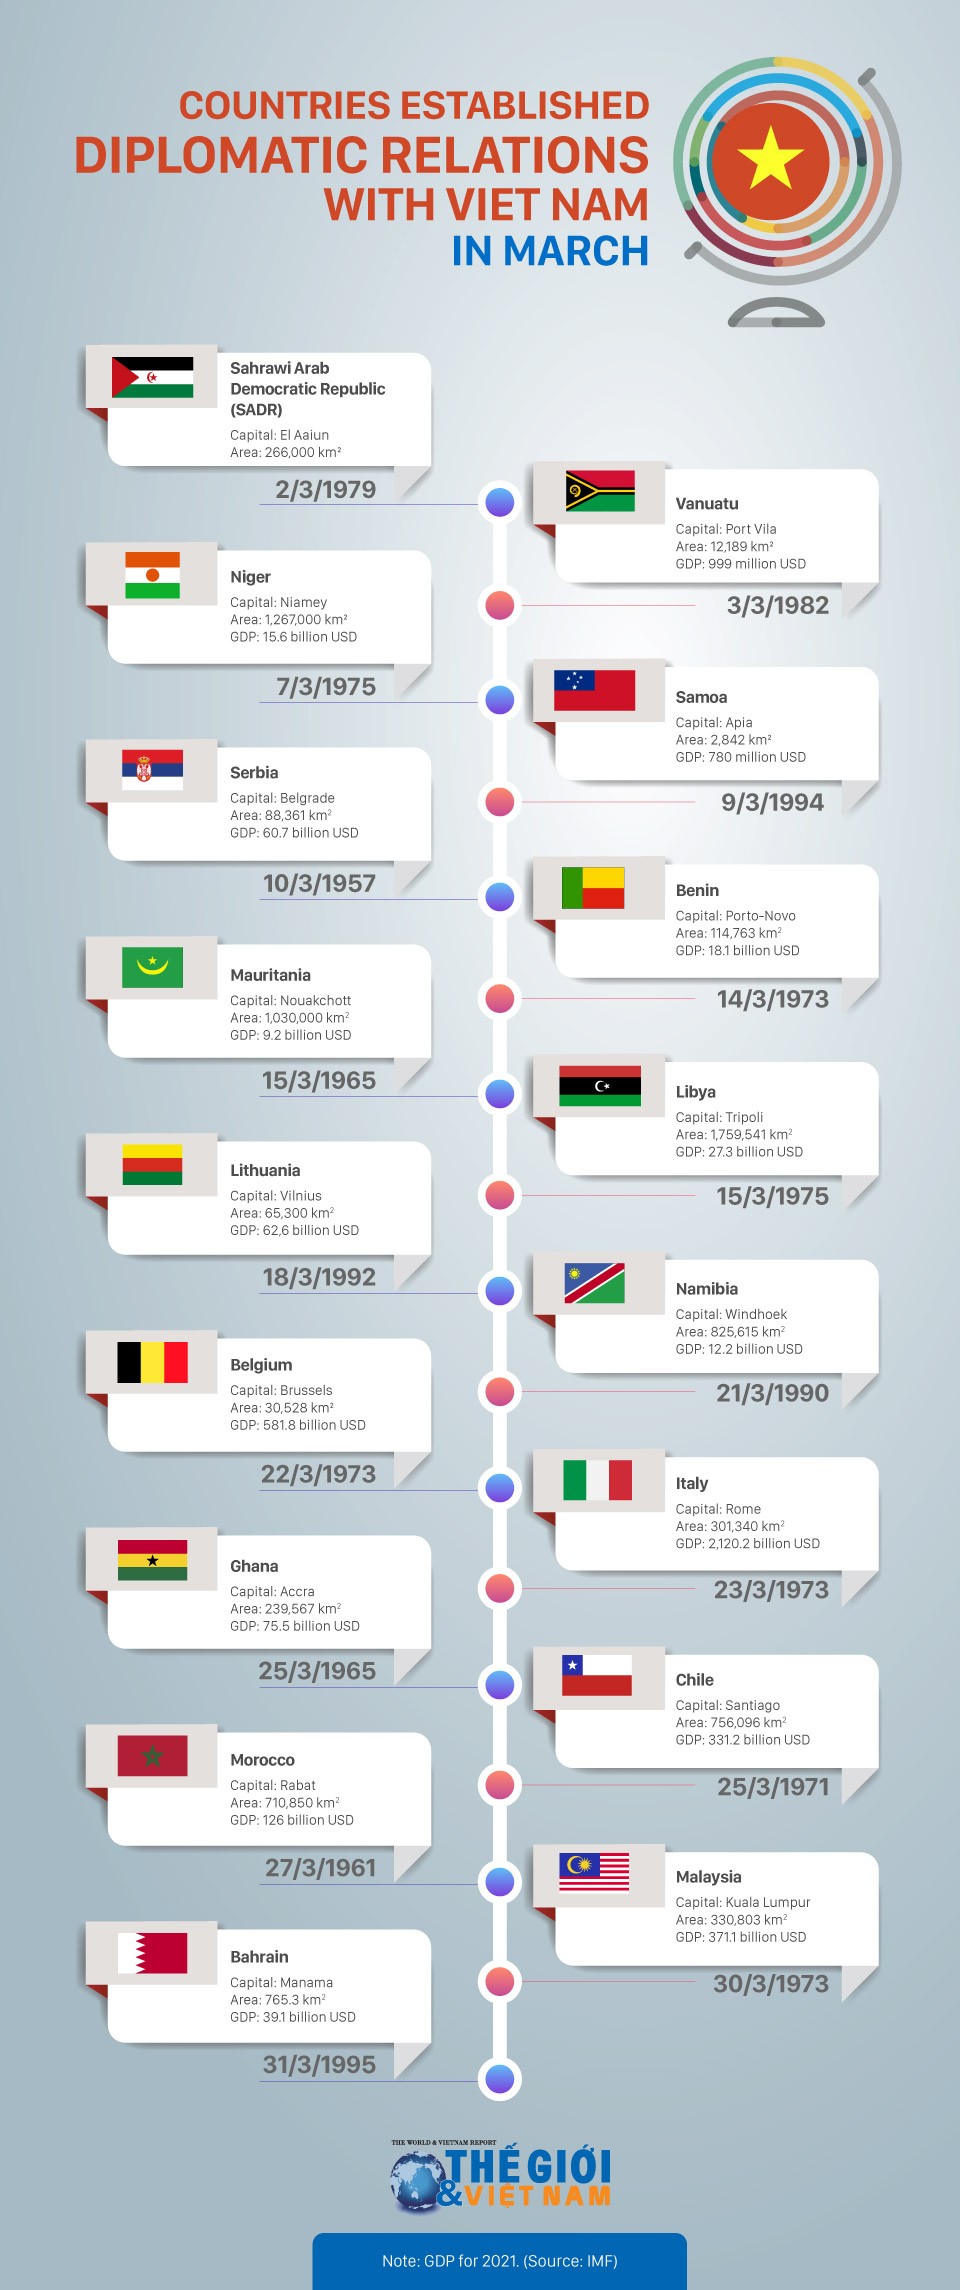 Which countries established diplomatic relations with Viet Nam in March?